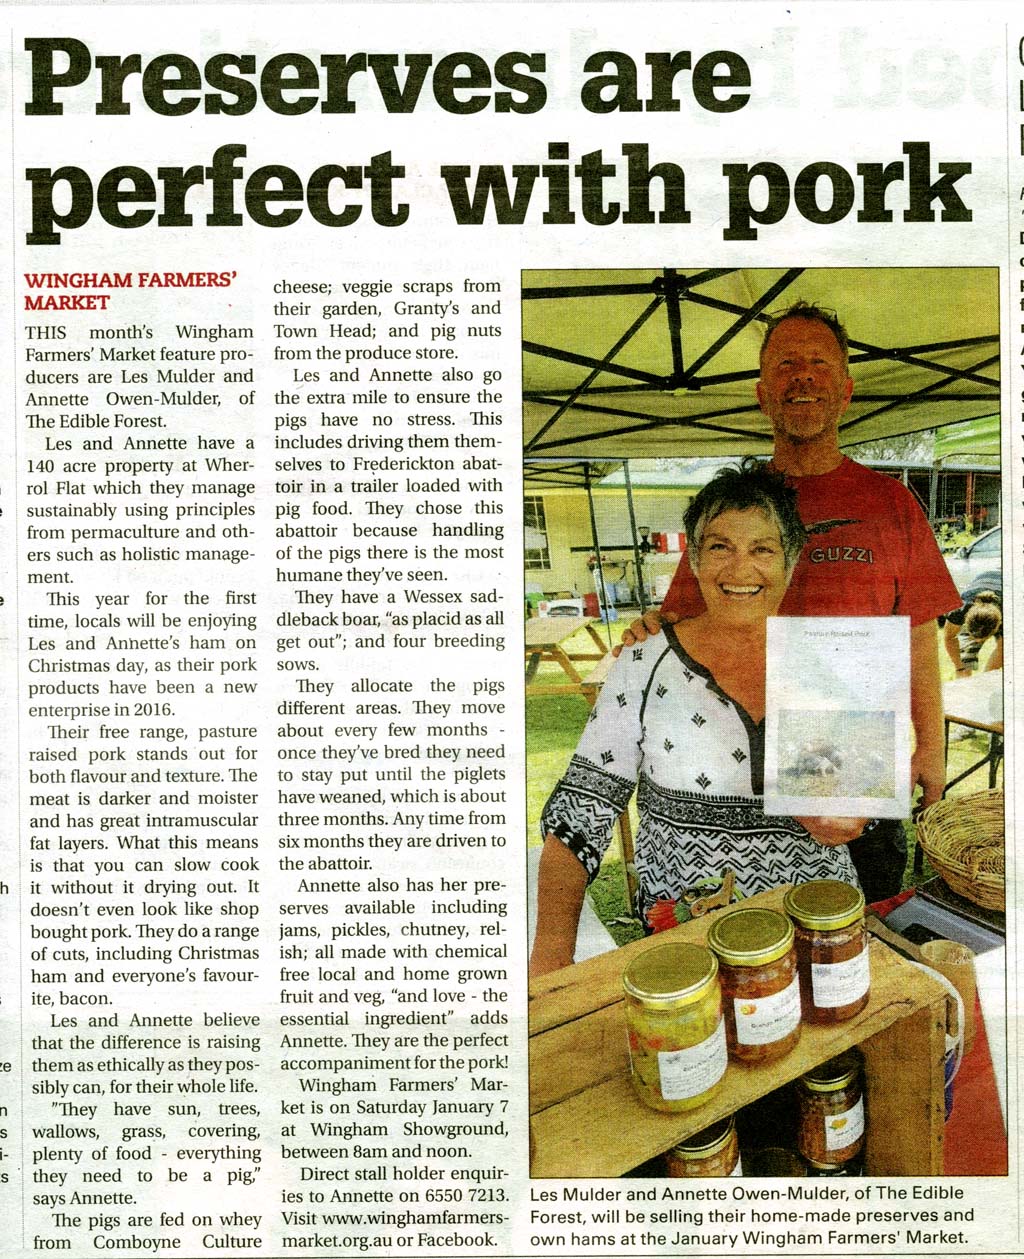 This month’s Wingham Farmers’ Market feature producers are Les Mulder and Annette Owen-Mulder of The Edible Forest. Les and Annette have a 140 acre property at Wherrol Flat which they manage sustainably using principles from permaculture and others such as holistic management. This year for the first time, savvy locals will be enjoying Les and Annette’s ham on Christmas day, as their pork products have been a new enterprise in 2016. Their free range, pasture raised pork stands out for both flavour and texture. The meat is darker and moister and has great intramuscular fat layers. What this means is that you can slow cook it without it drying out. It doesn’t even look like shop bought pork. They do a range of cuts, including Christmas ham and everyone’s favourite, bacon. Les and Annette believe that the difference is raising them as ethically as they possibly can, for their whole life. ”They have sun, trees, wallows, grass, covering, plenty of food - everything they need to be a pig” says Annette. The pigs are fed on whey from Comboyne Culture cheese; veggie scraps from their garden, Granty’s and Town Head; and pig nuts from the produce store. Les and Annette also go the extra mile to ensure the pigs have no stress. This includes driving them themselves to Frederickton abattoir in a trailer loaded with pig food. They chose this abattoir because handling of the pigs there is the most humane they’ve seen. They have a Wessex saddleback boar, “as placid as all get out”; and four breeding sows. There is Brunhilda, a Berkshire x large white; Esmerelda and Bludwin, Wessex Saddleback x large white x Berkshire; and Ladybird, a Duroc. They allocate the pigs different areas. They move about every few months - once they’ve bred they need to stay put until the piglets have weaned, which is about three months. Any time from six months they are driven to the abattoir. Annette also has her preserves available including jams, pickles, chutney, relish; all made with chemical free local and home grown fruit and veg, “and love - the essential ingredient” adds Annette. They are the perfect accompaniment for the pork!